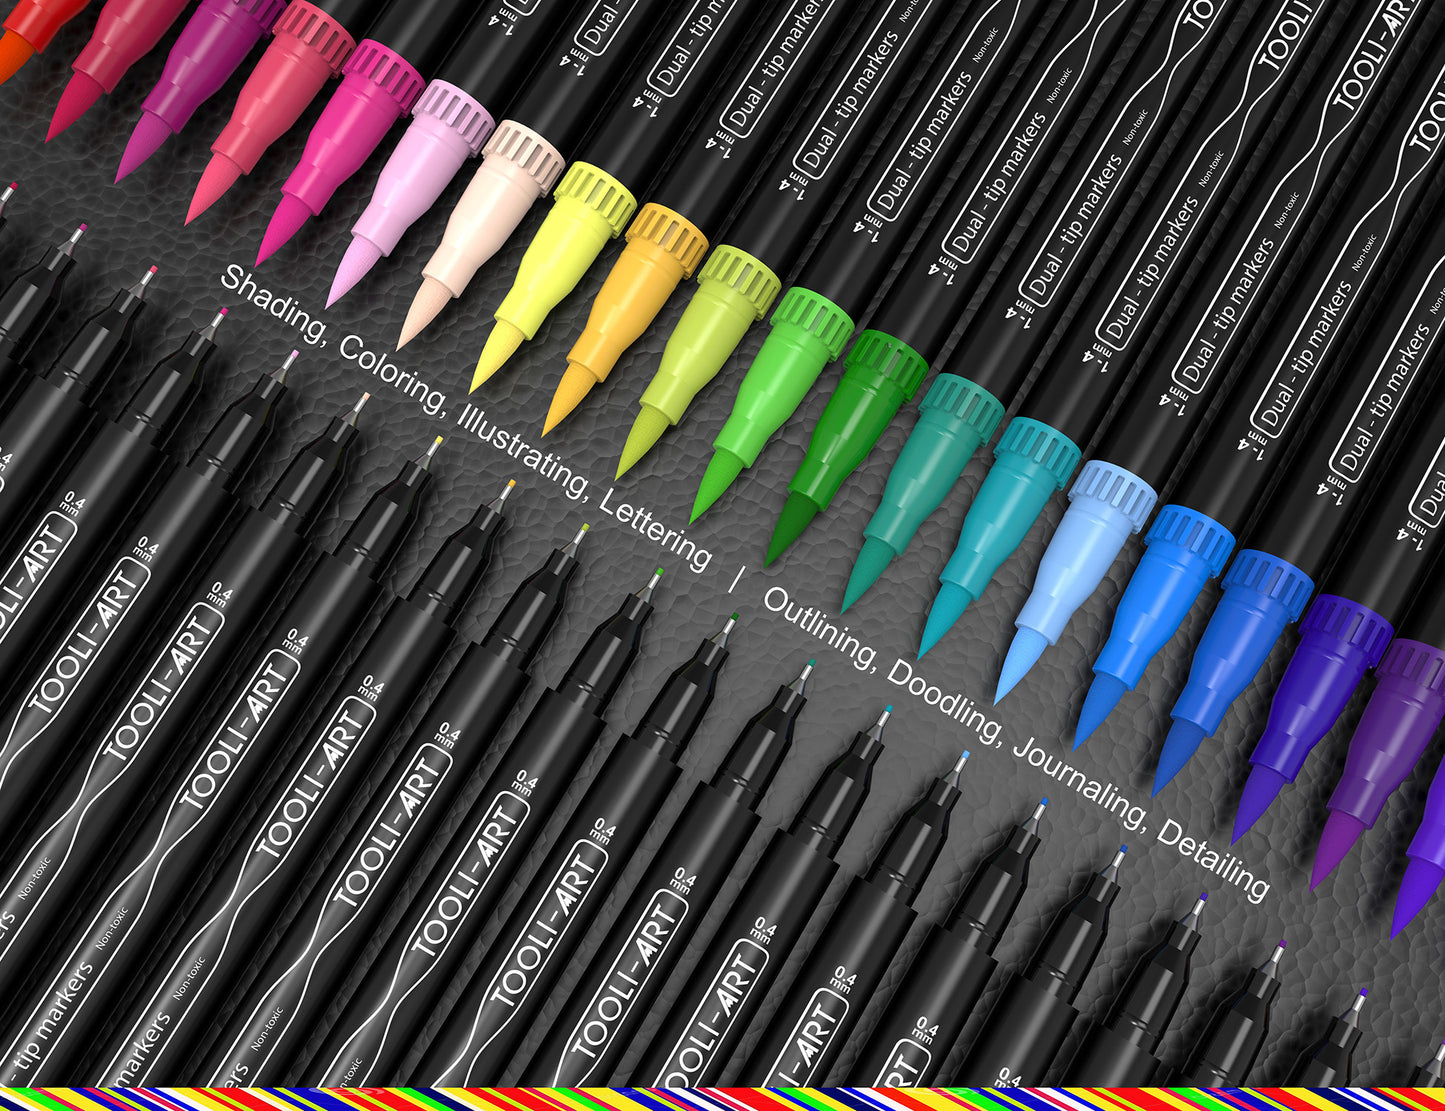 TOOLI-ART Dual-Tip Brush Pens (PIGMENT INK BASED) 36 Color Set With Canvas Organizer (Flexible Brush and 0.4mm Fineliner)